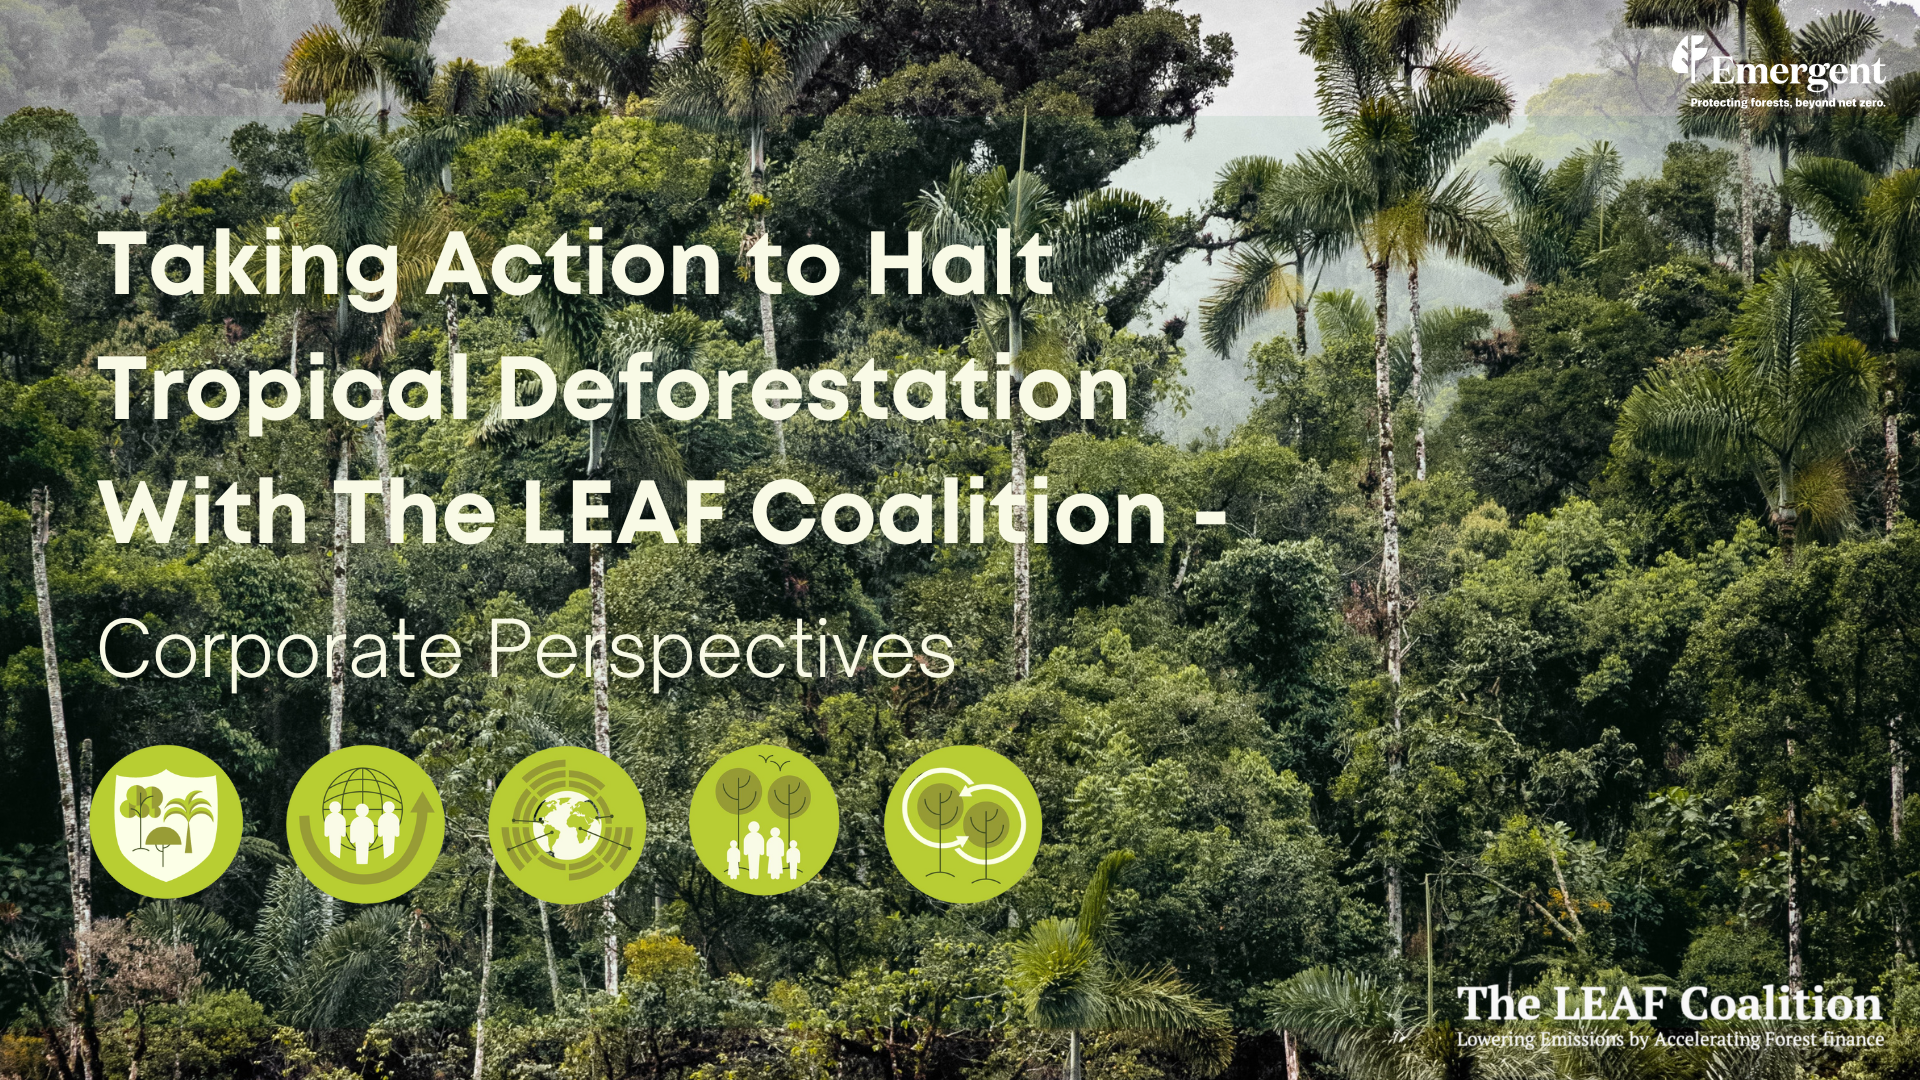 18 JULY 2022: Emergent launches new #WhyLEAF report 